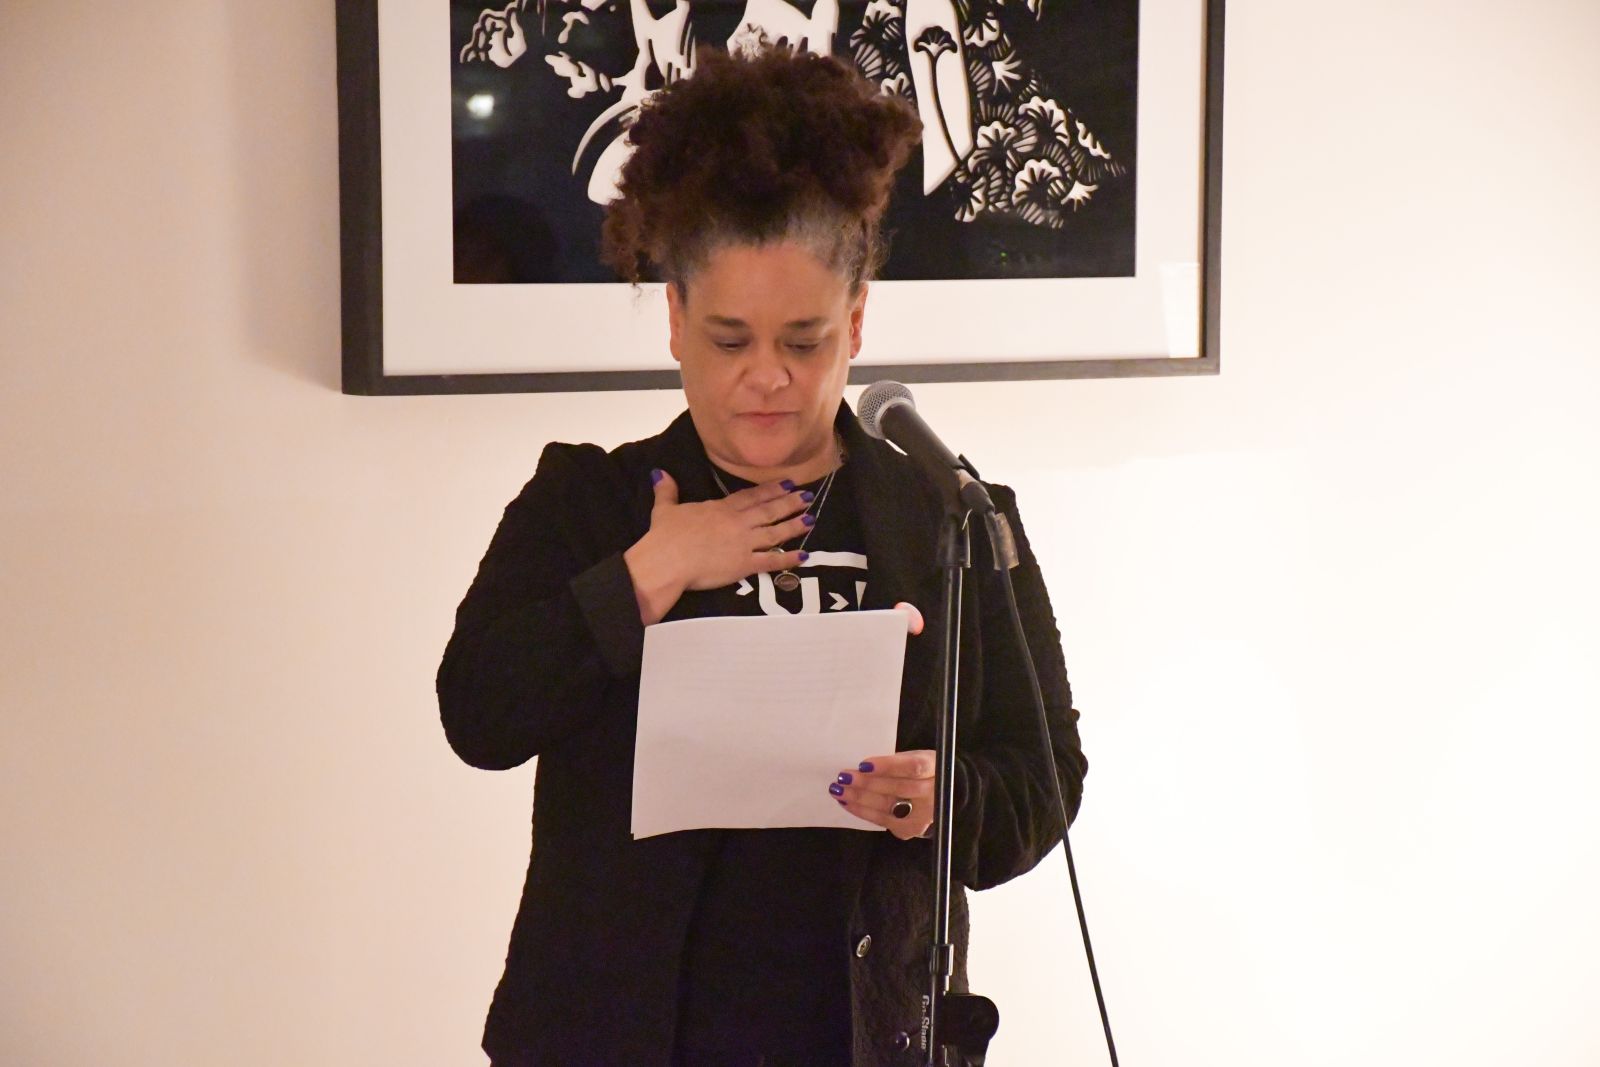 Katherine McKittrick (Professor and Canada Research Chari in Black Studies), speaking at the event